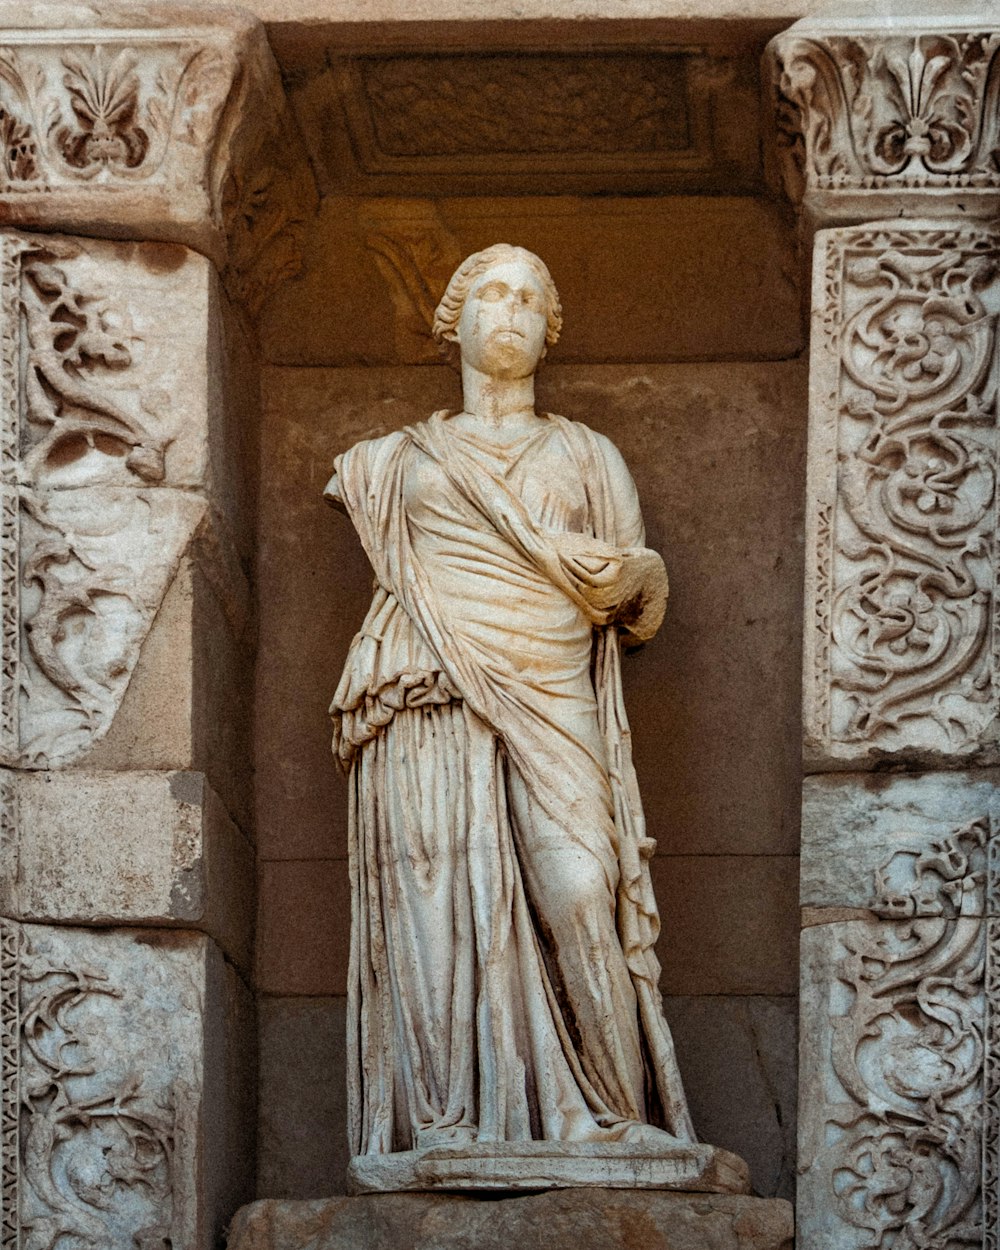 a statue of a woman in a white dress